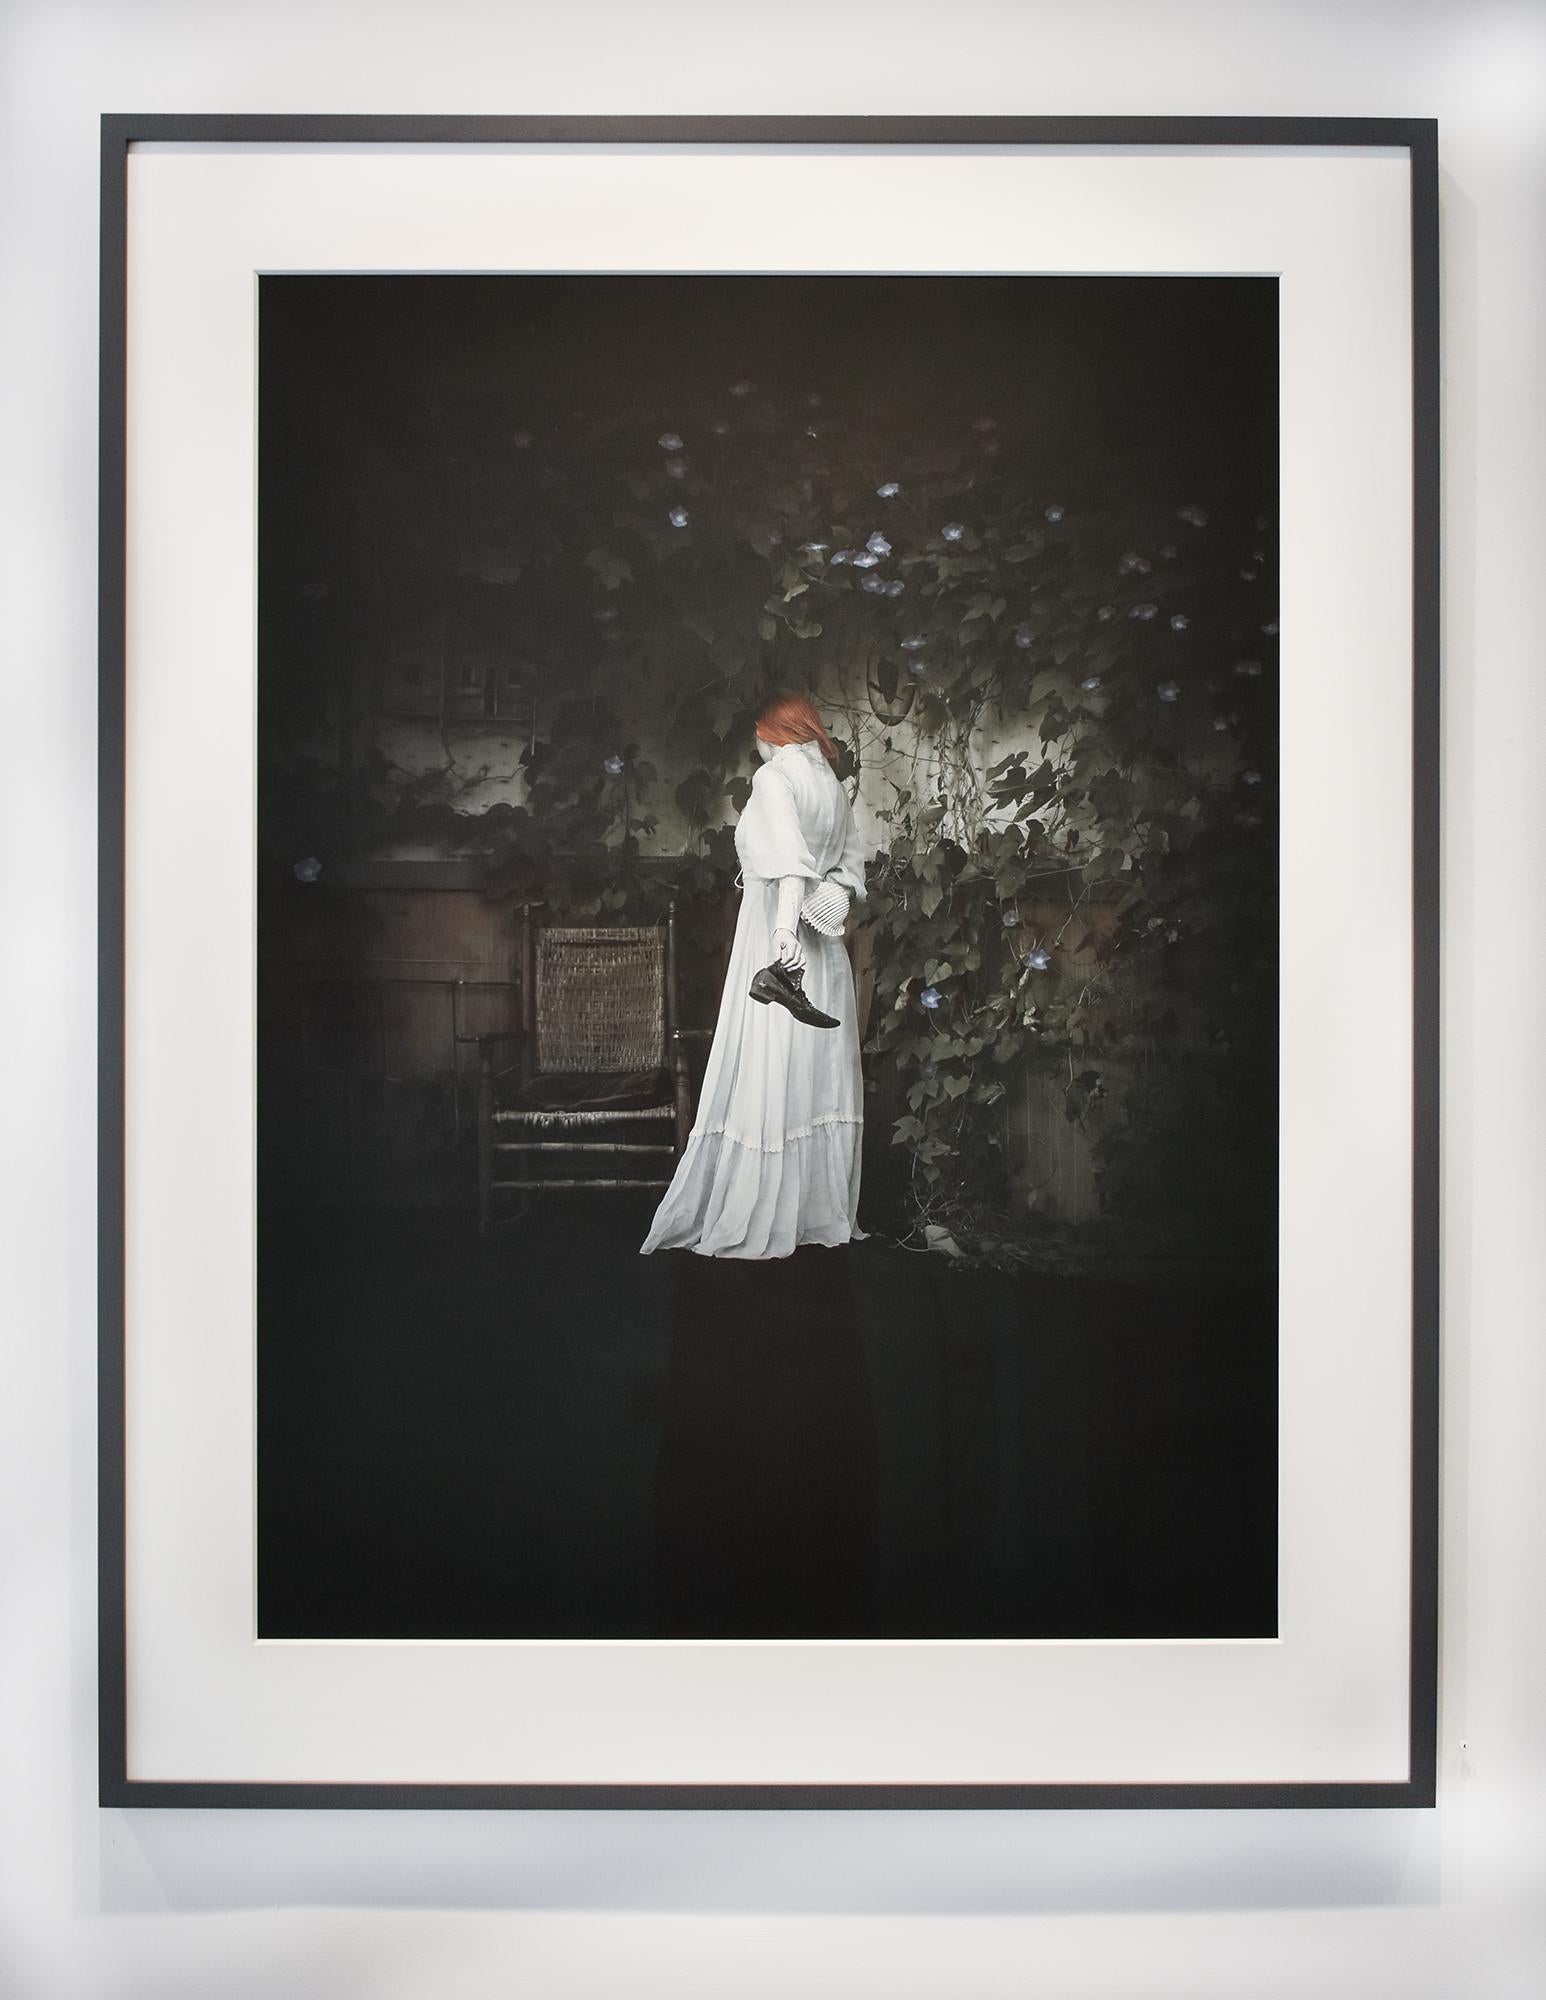 Figurative photograph of a young woman in an eerie old-fashioned interior with vines and purple morning glories 
archival pigment print, edition of 10 
40 x 30 inches, 49 x 39 inches in dark grey painted wood frame with 8-ply mat and non-glare